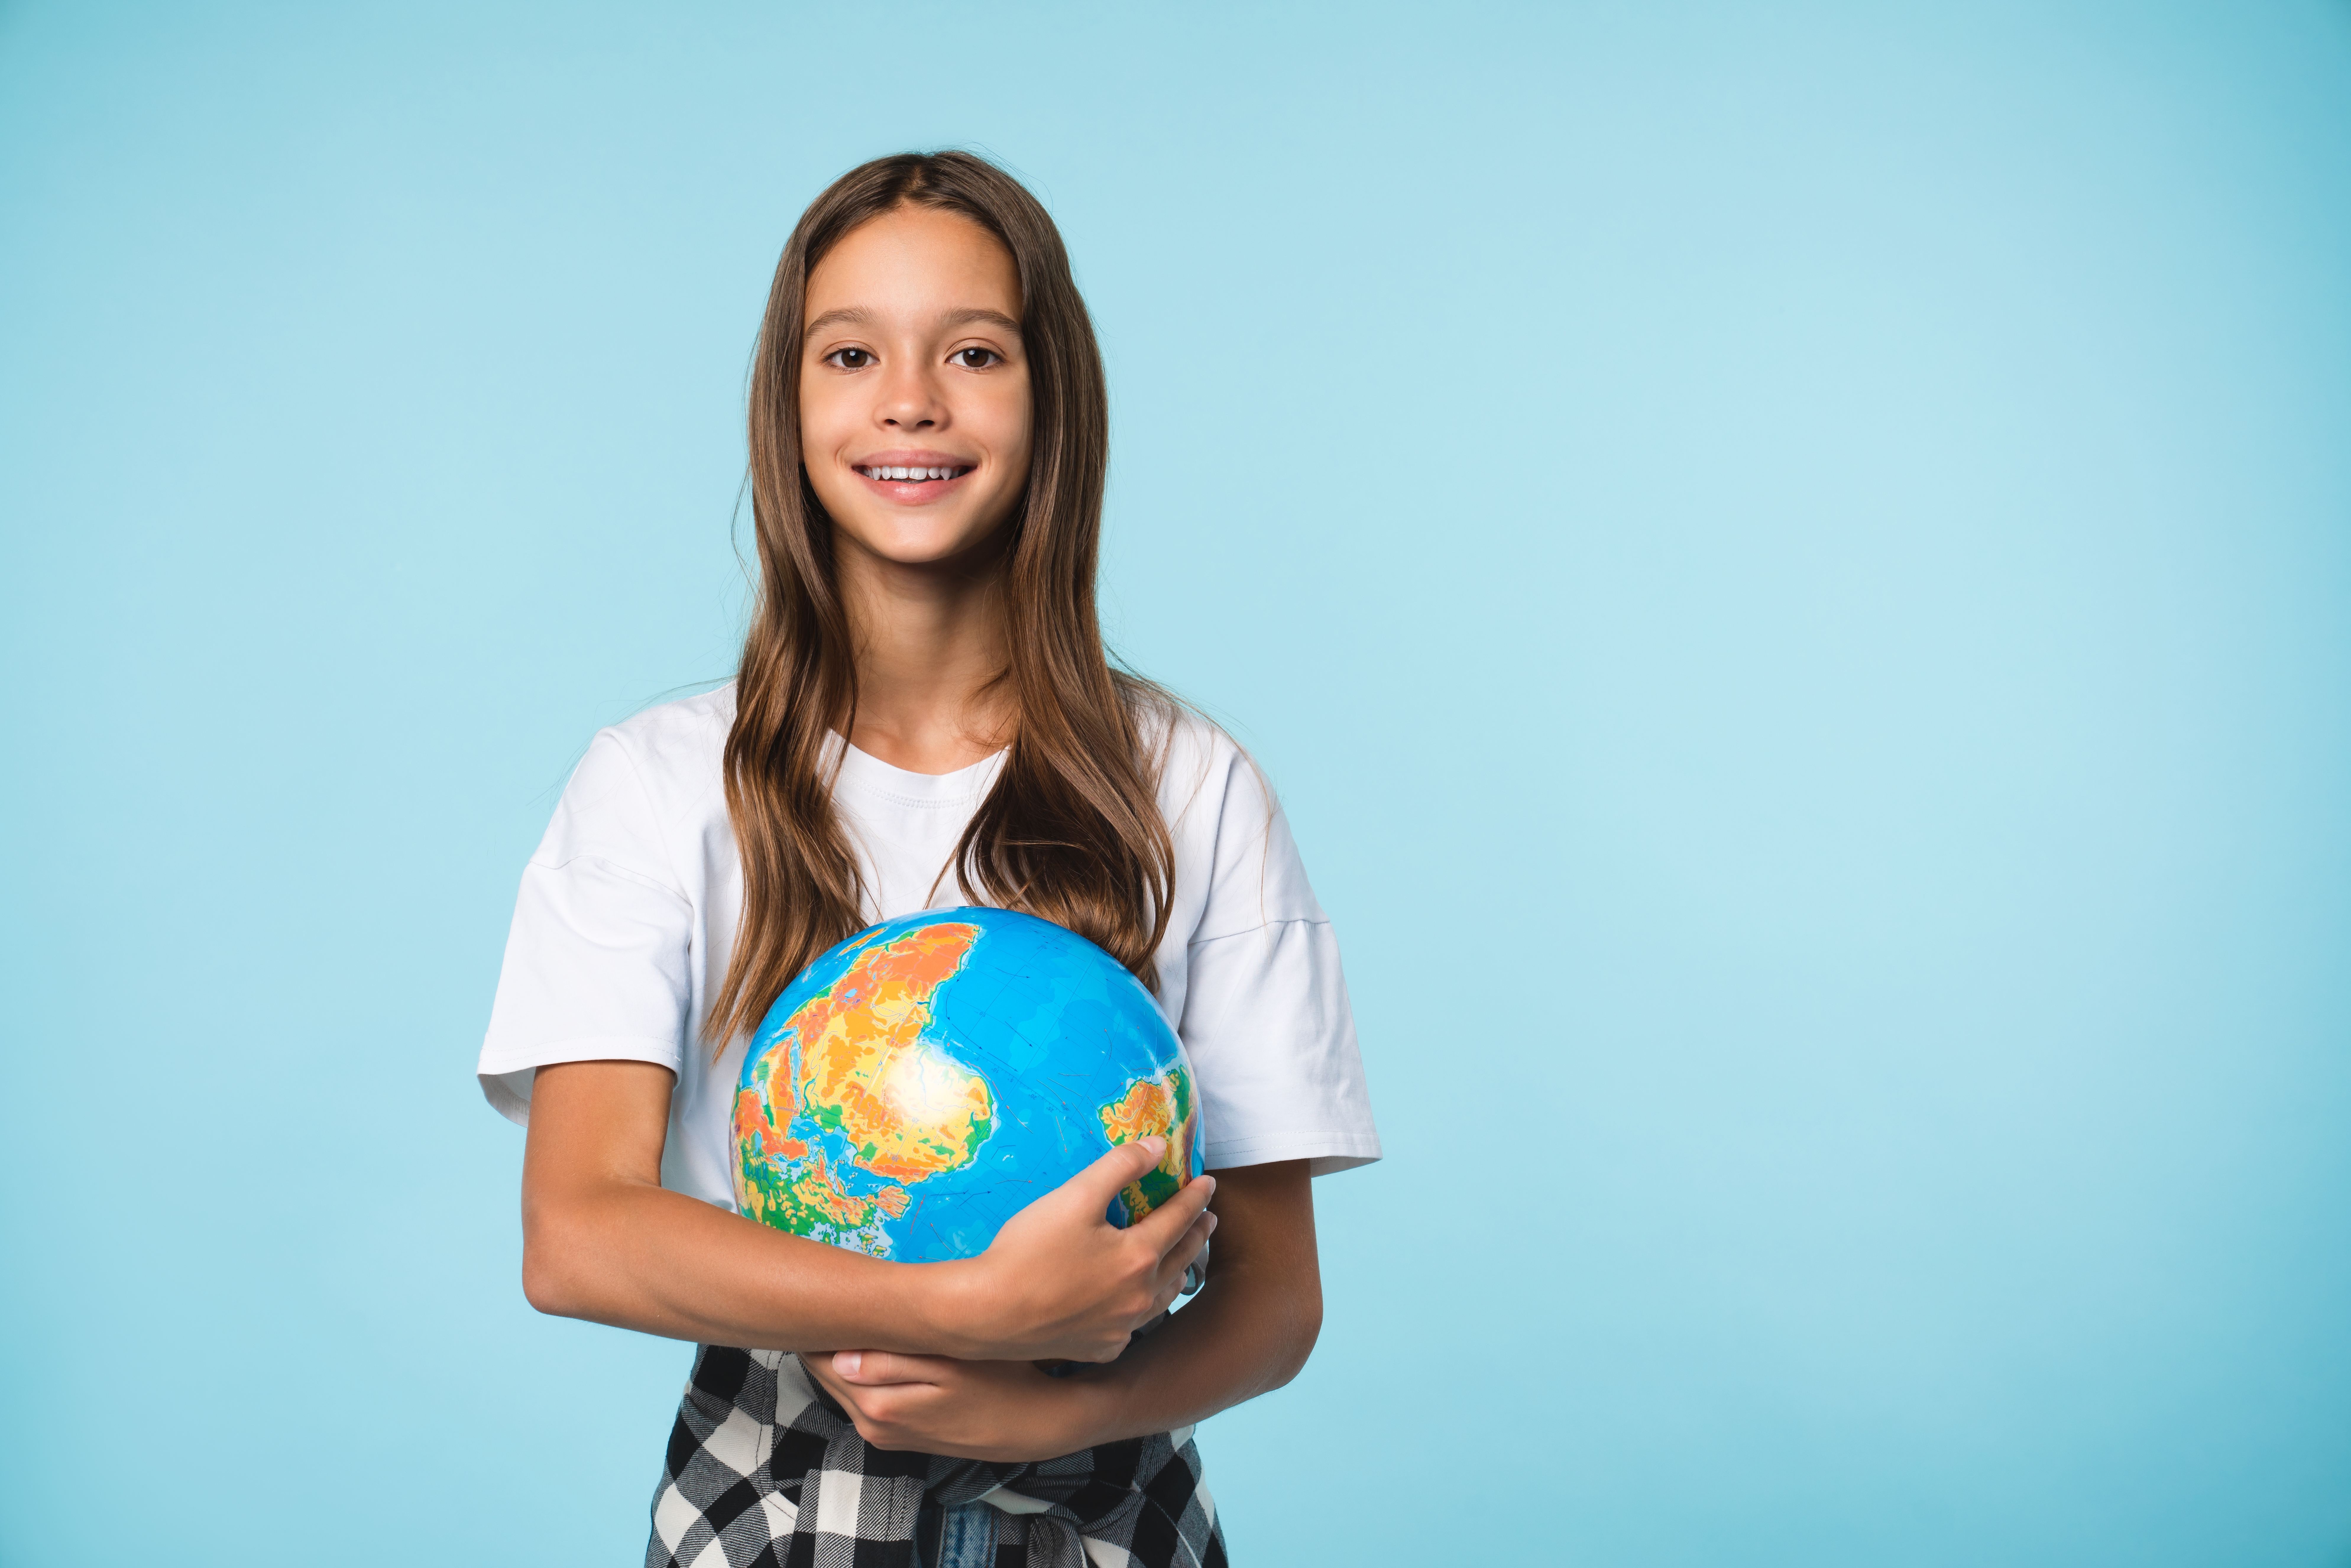 young girl holding a globe practicing geography quiz questions